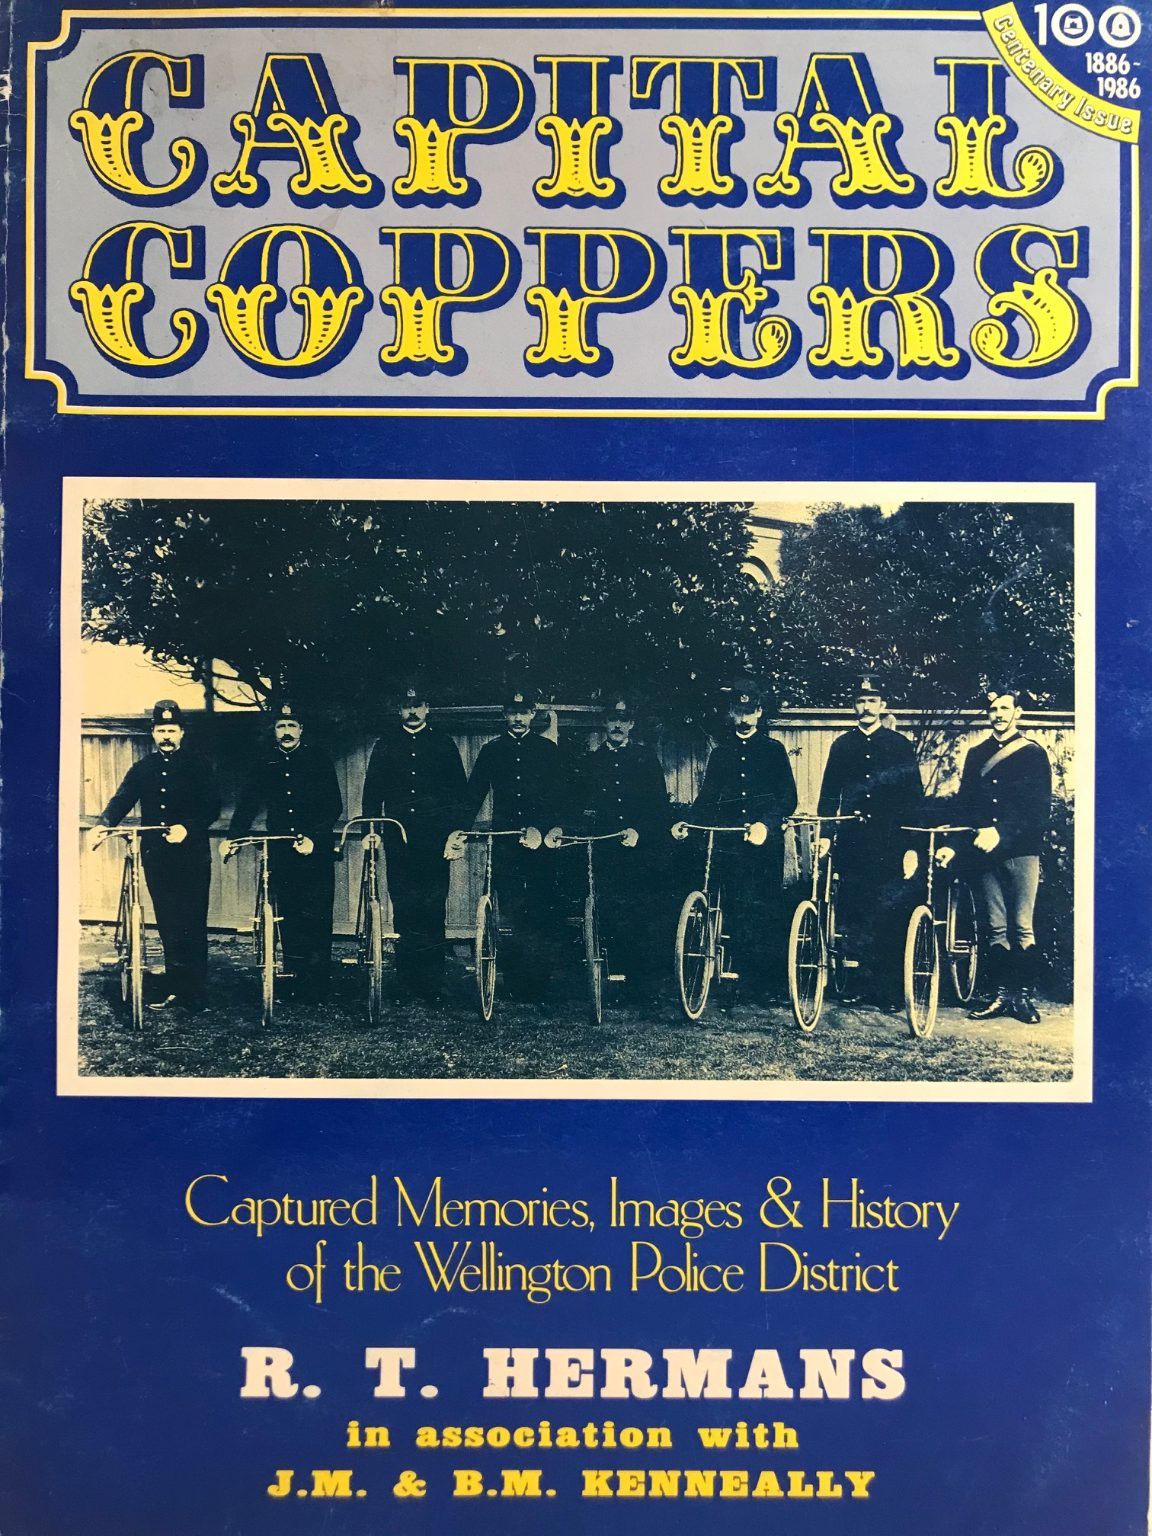 CAPITAL COPPERS: Captured Memories & History of The Wellington Police District